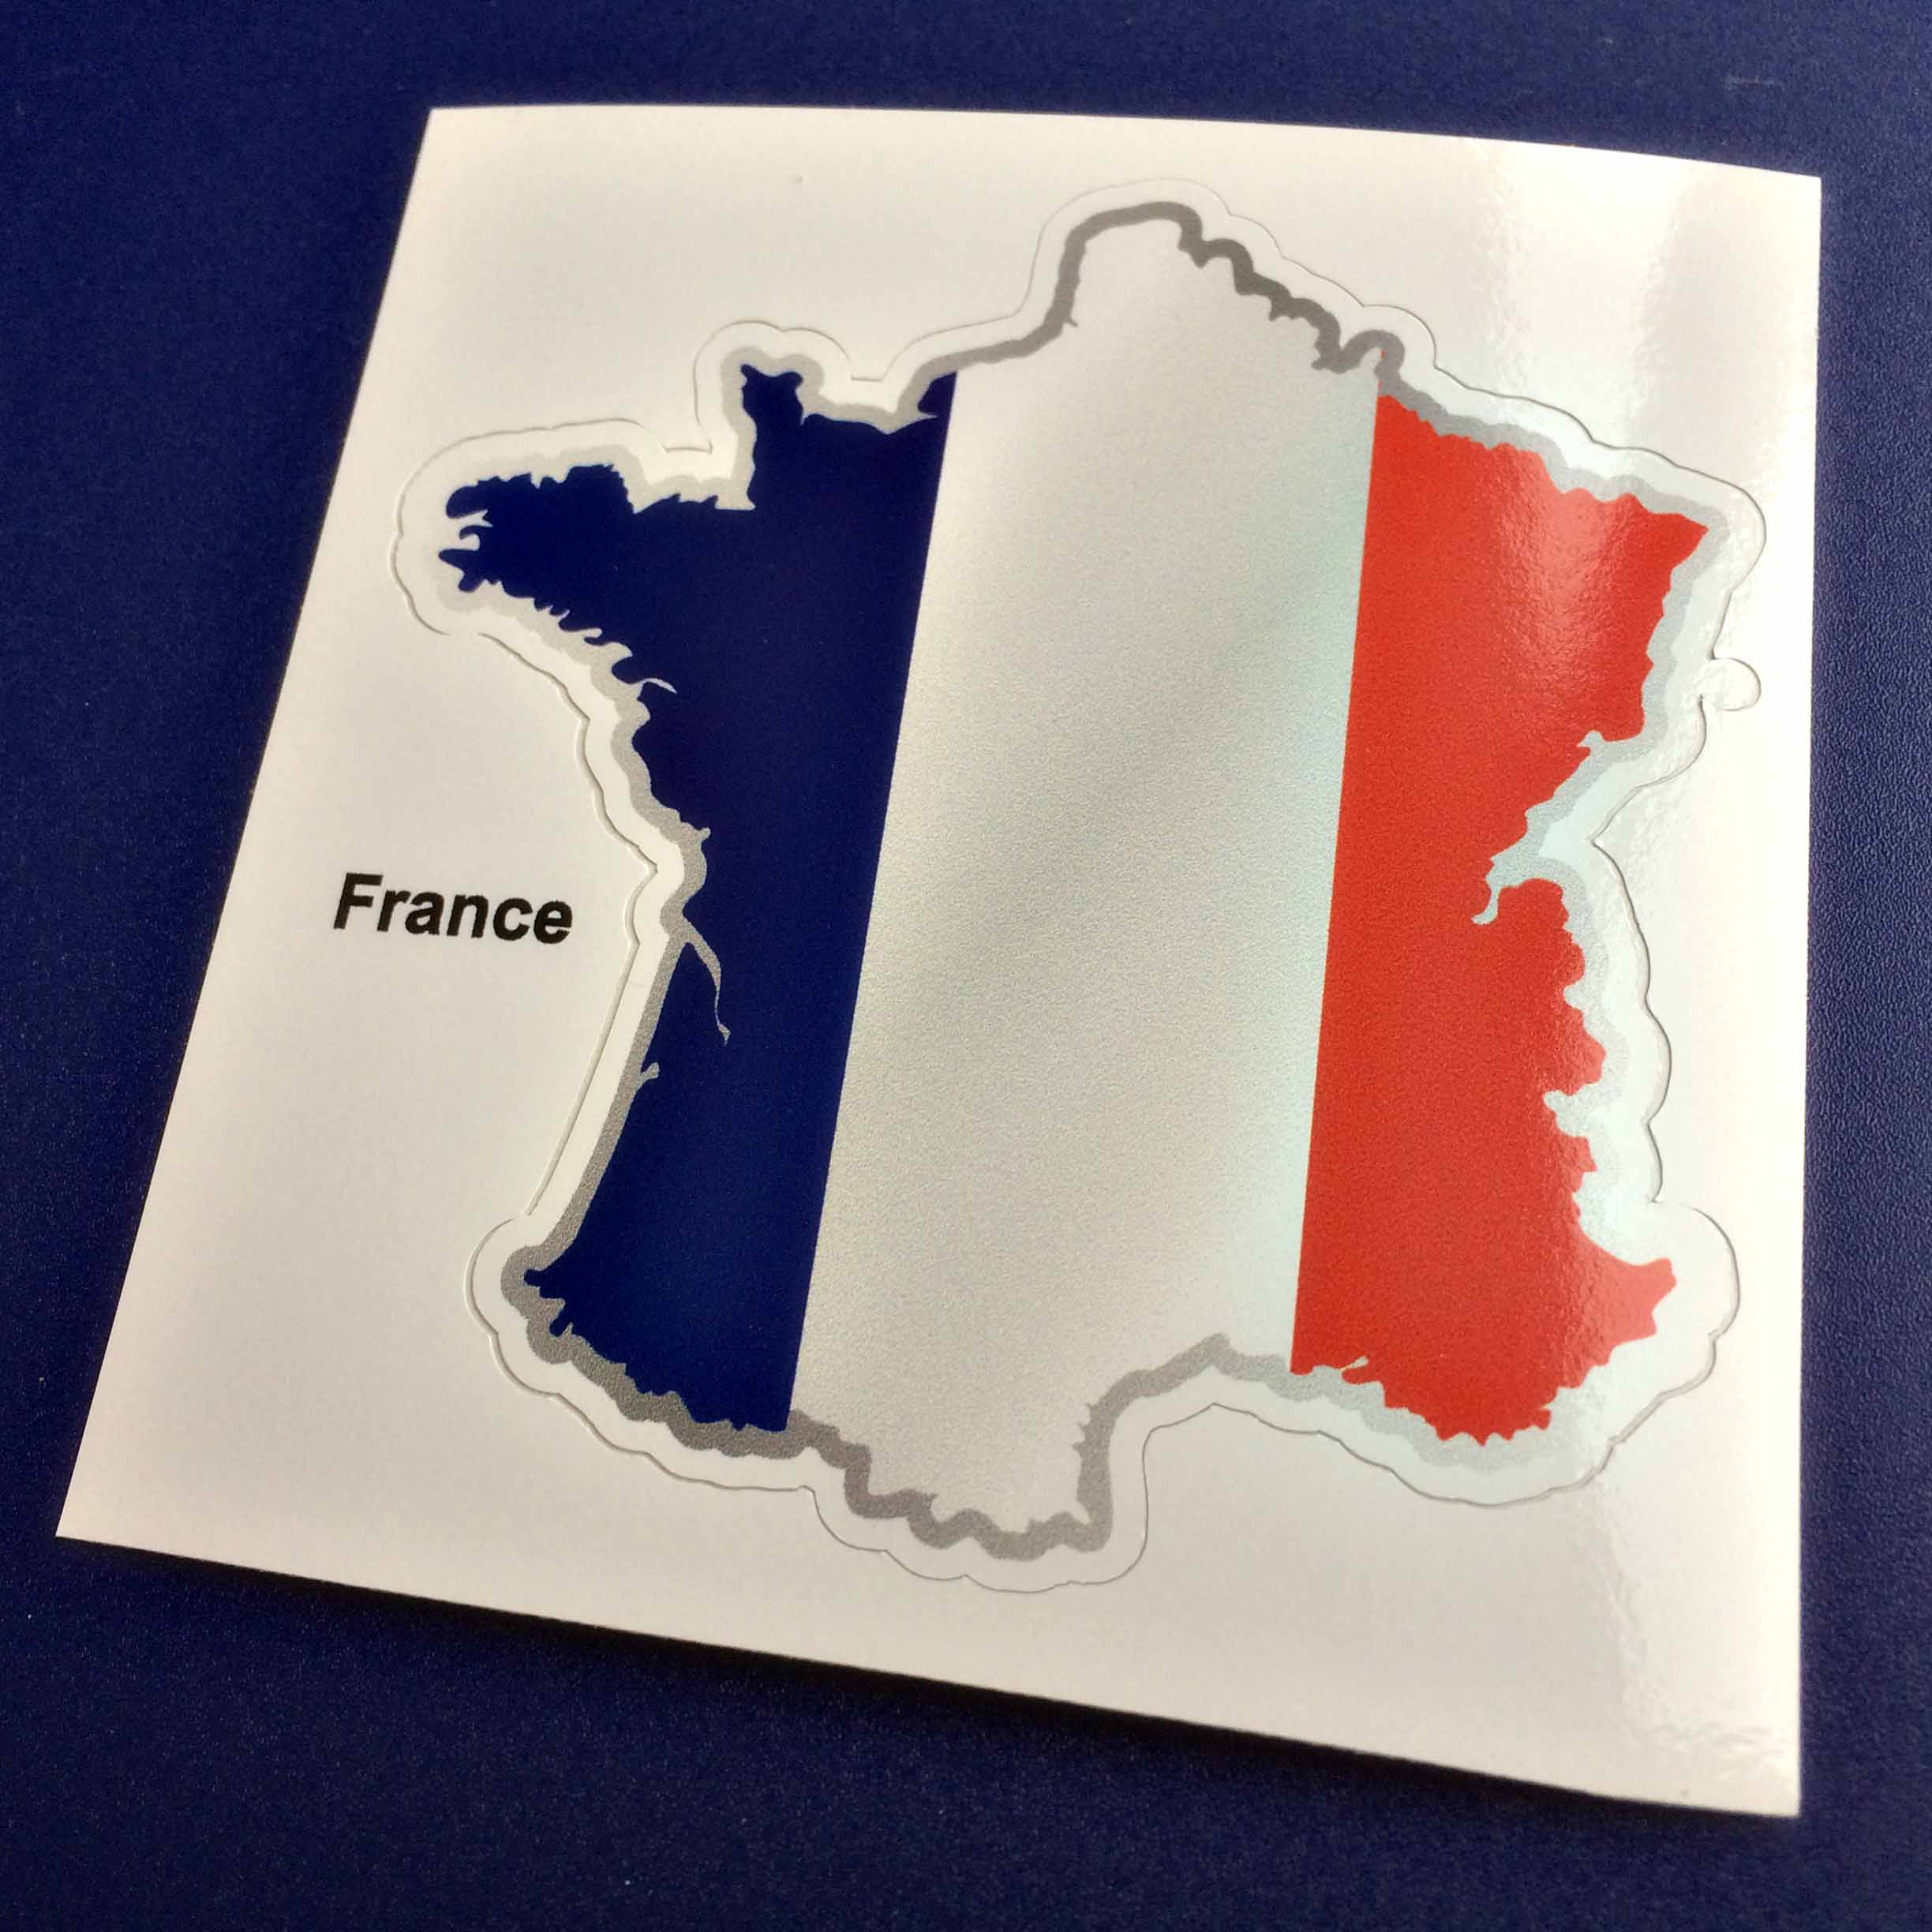 A map and flag of France. A tricolour of three vertical bands in blue, white and red.